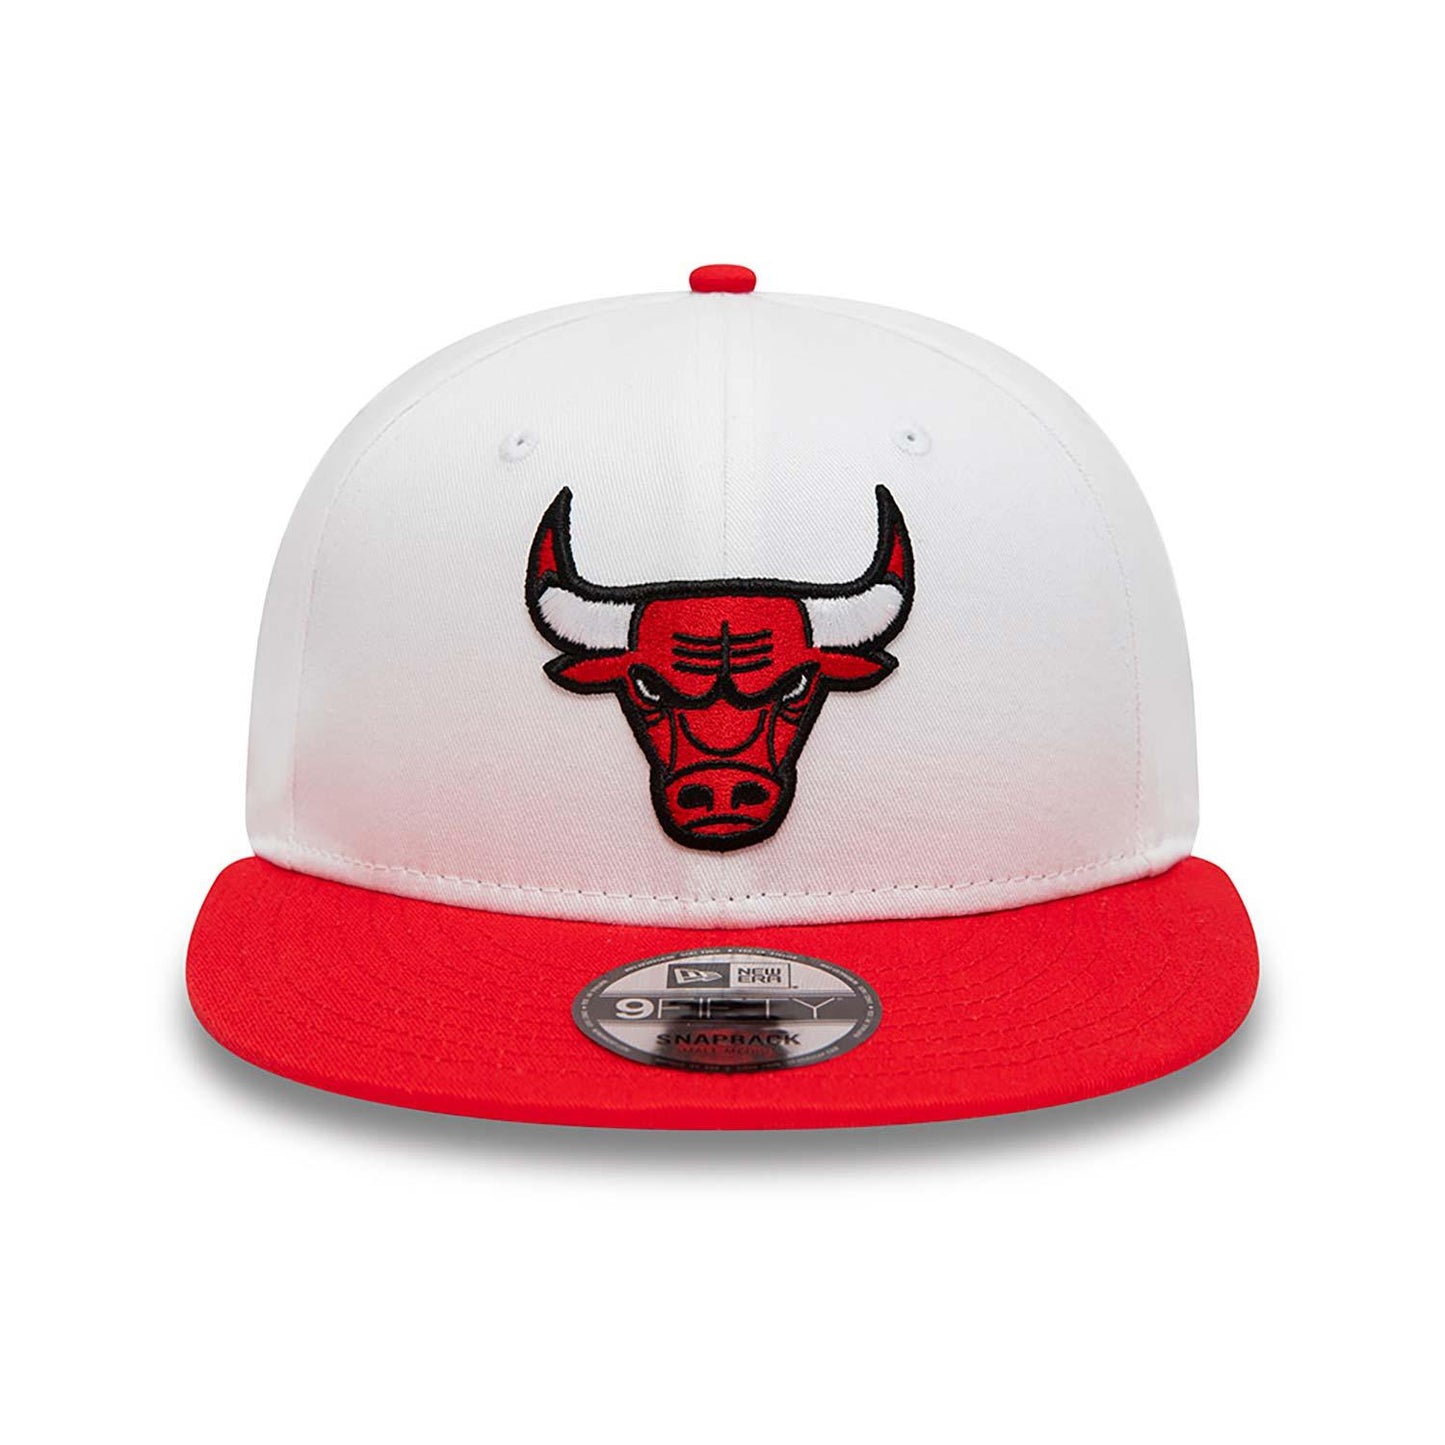 all red chicago bulls snapback